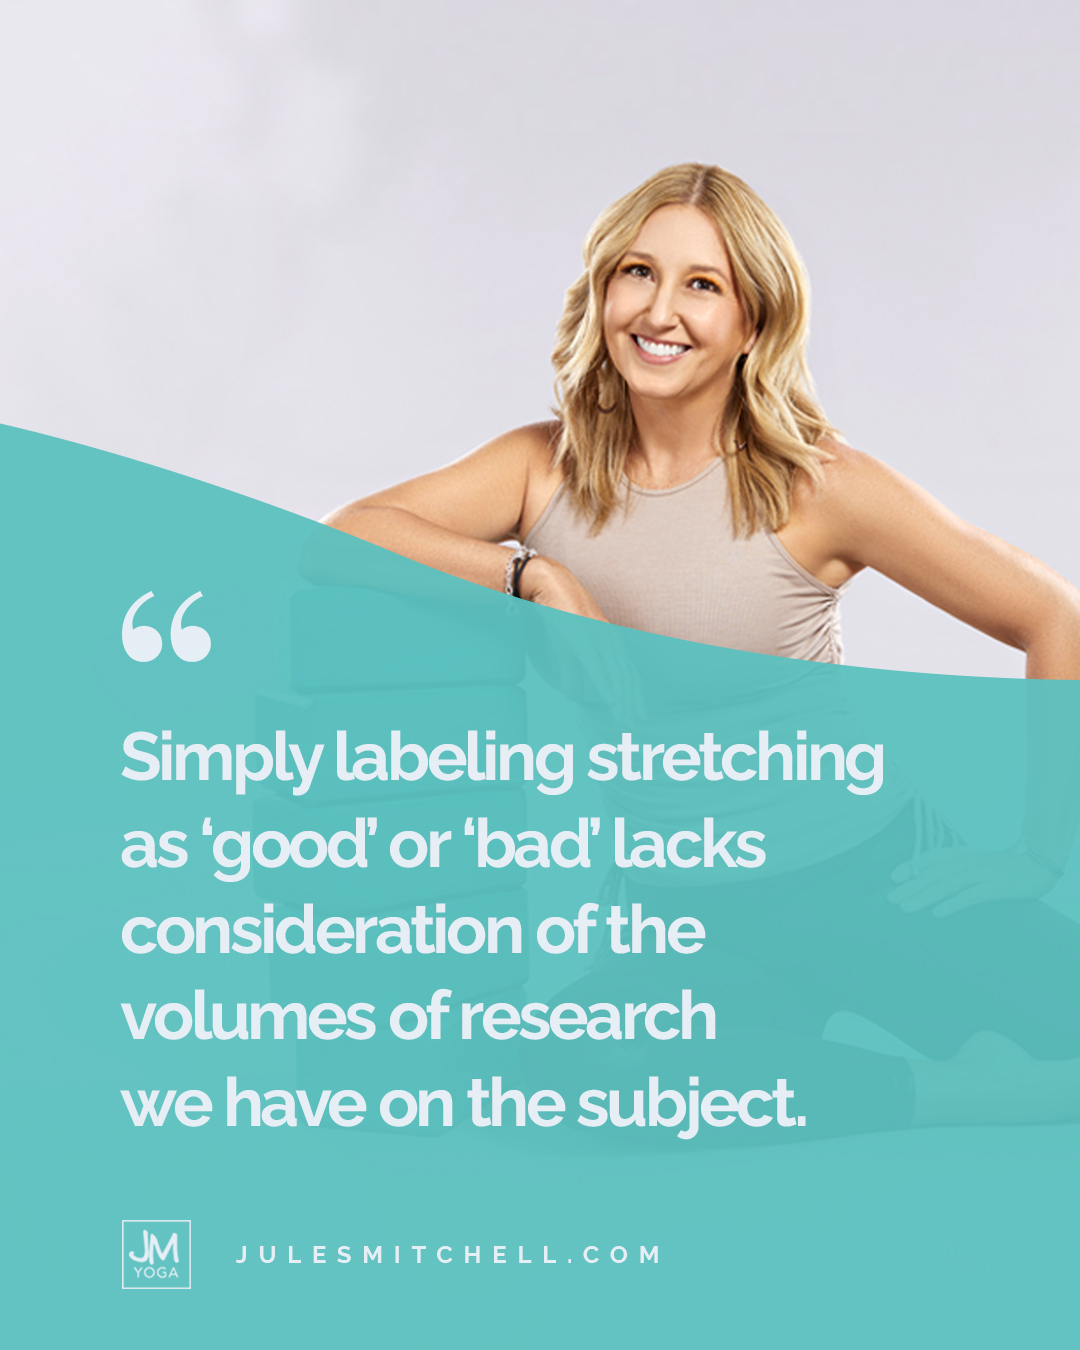 Simply labeling stretching as "good" or "bad" lacks consideration of the volumes of research we have on the subject.